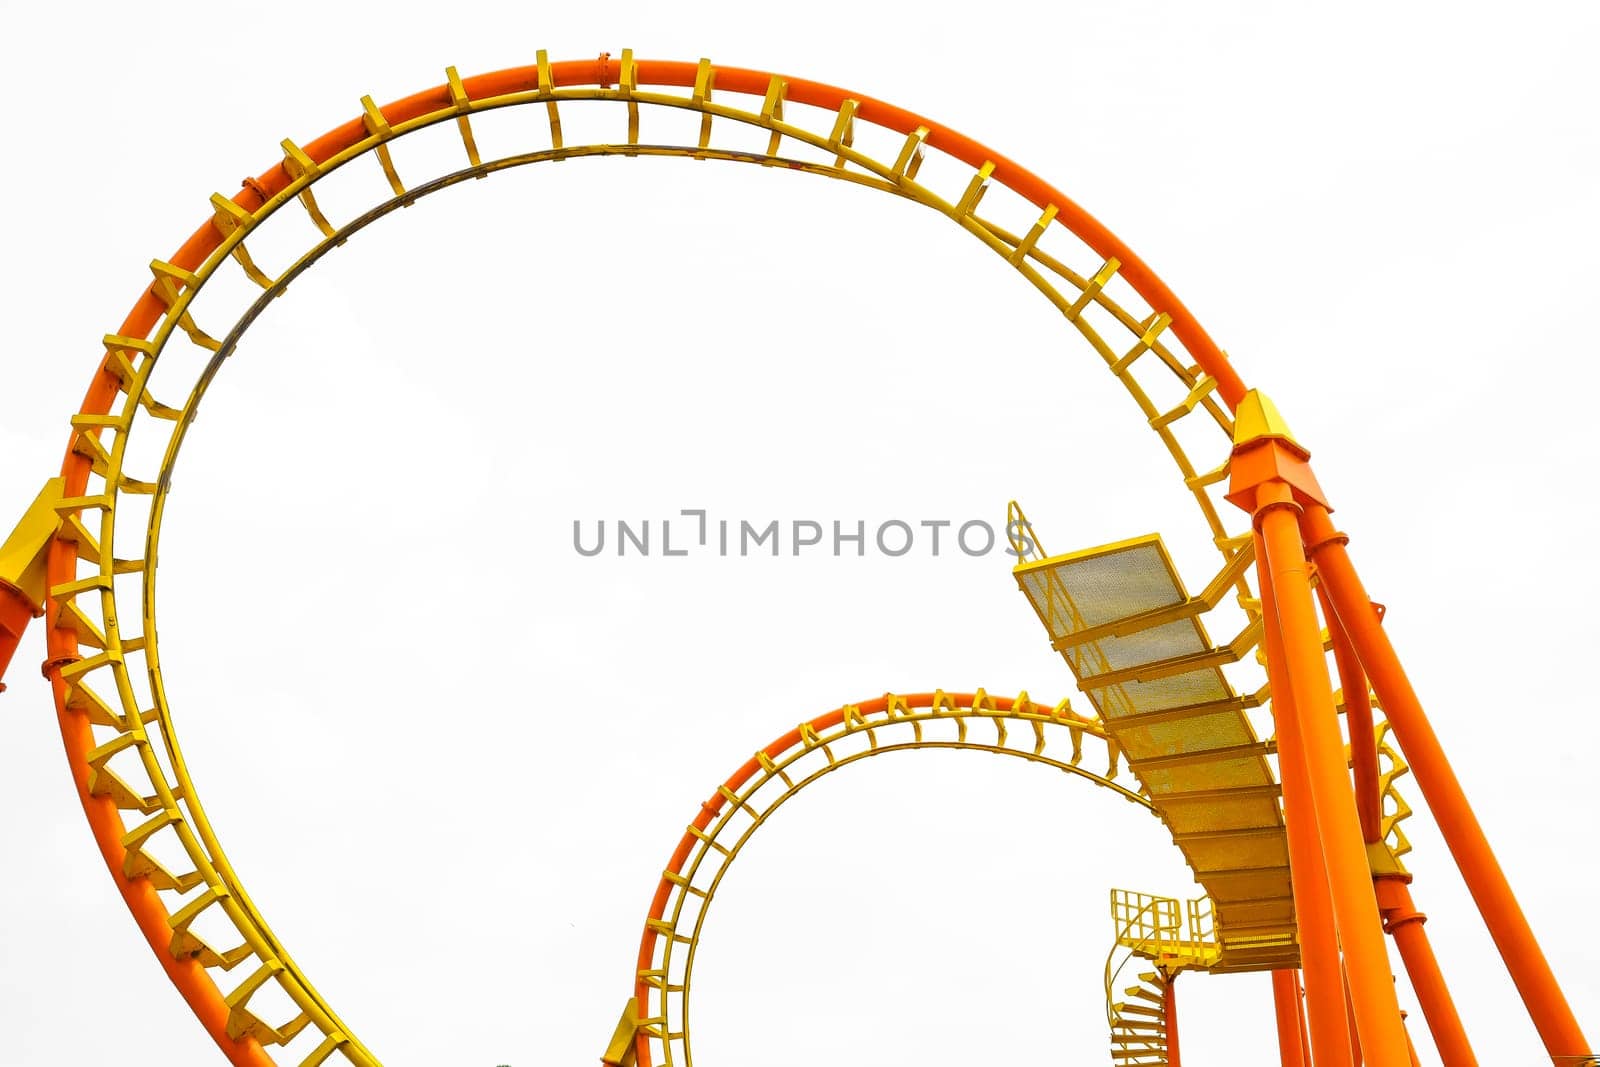 Rollercoaster on white background by ponsulak